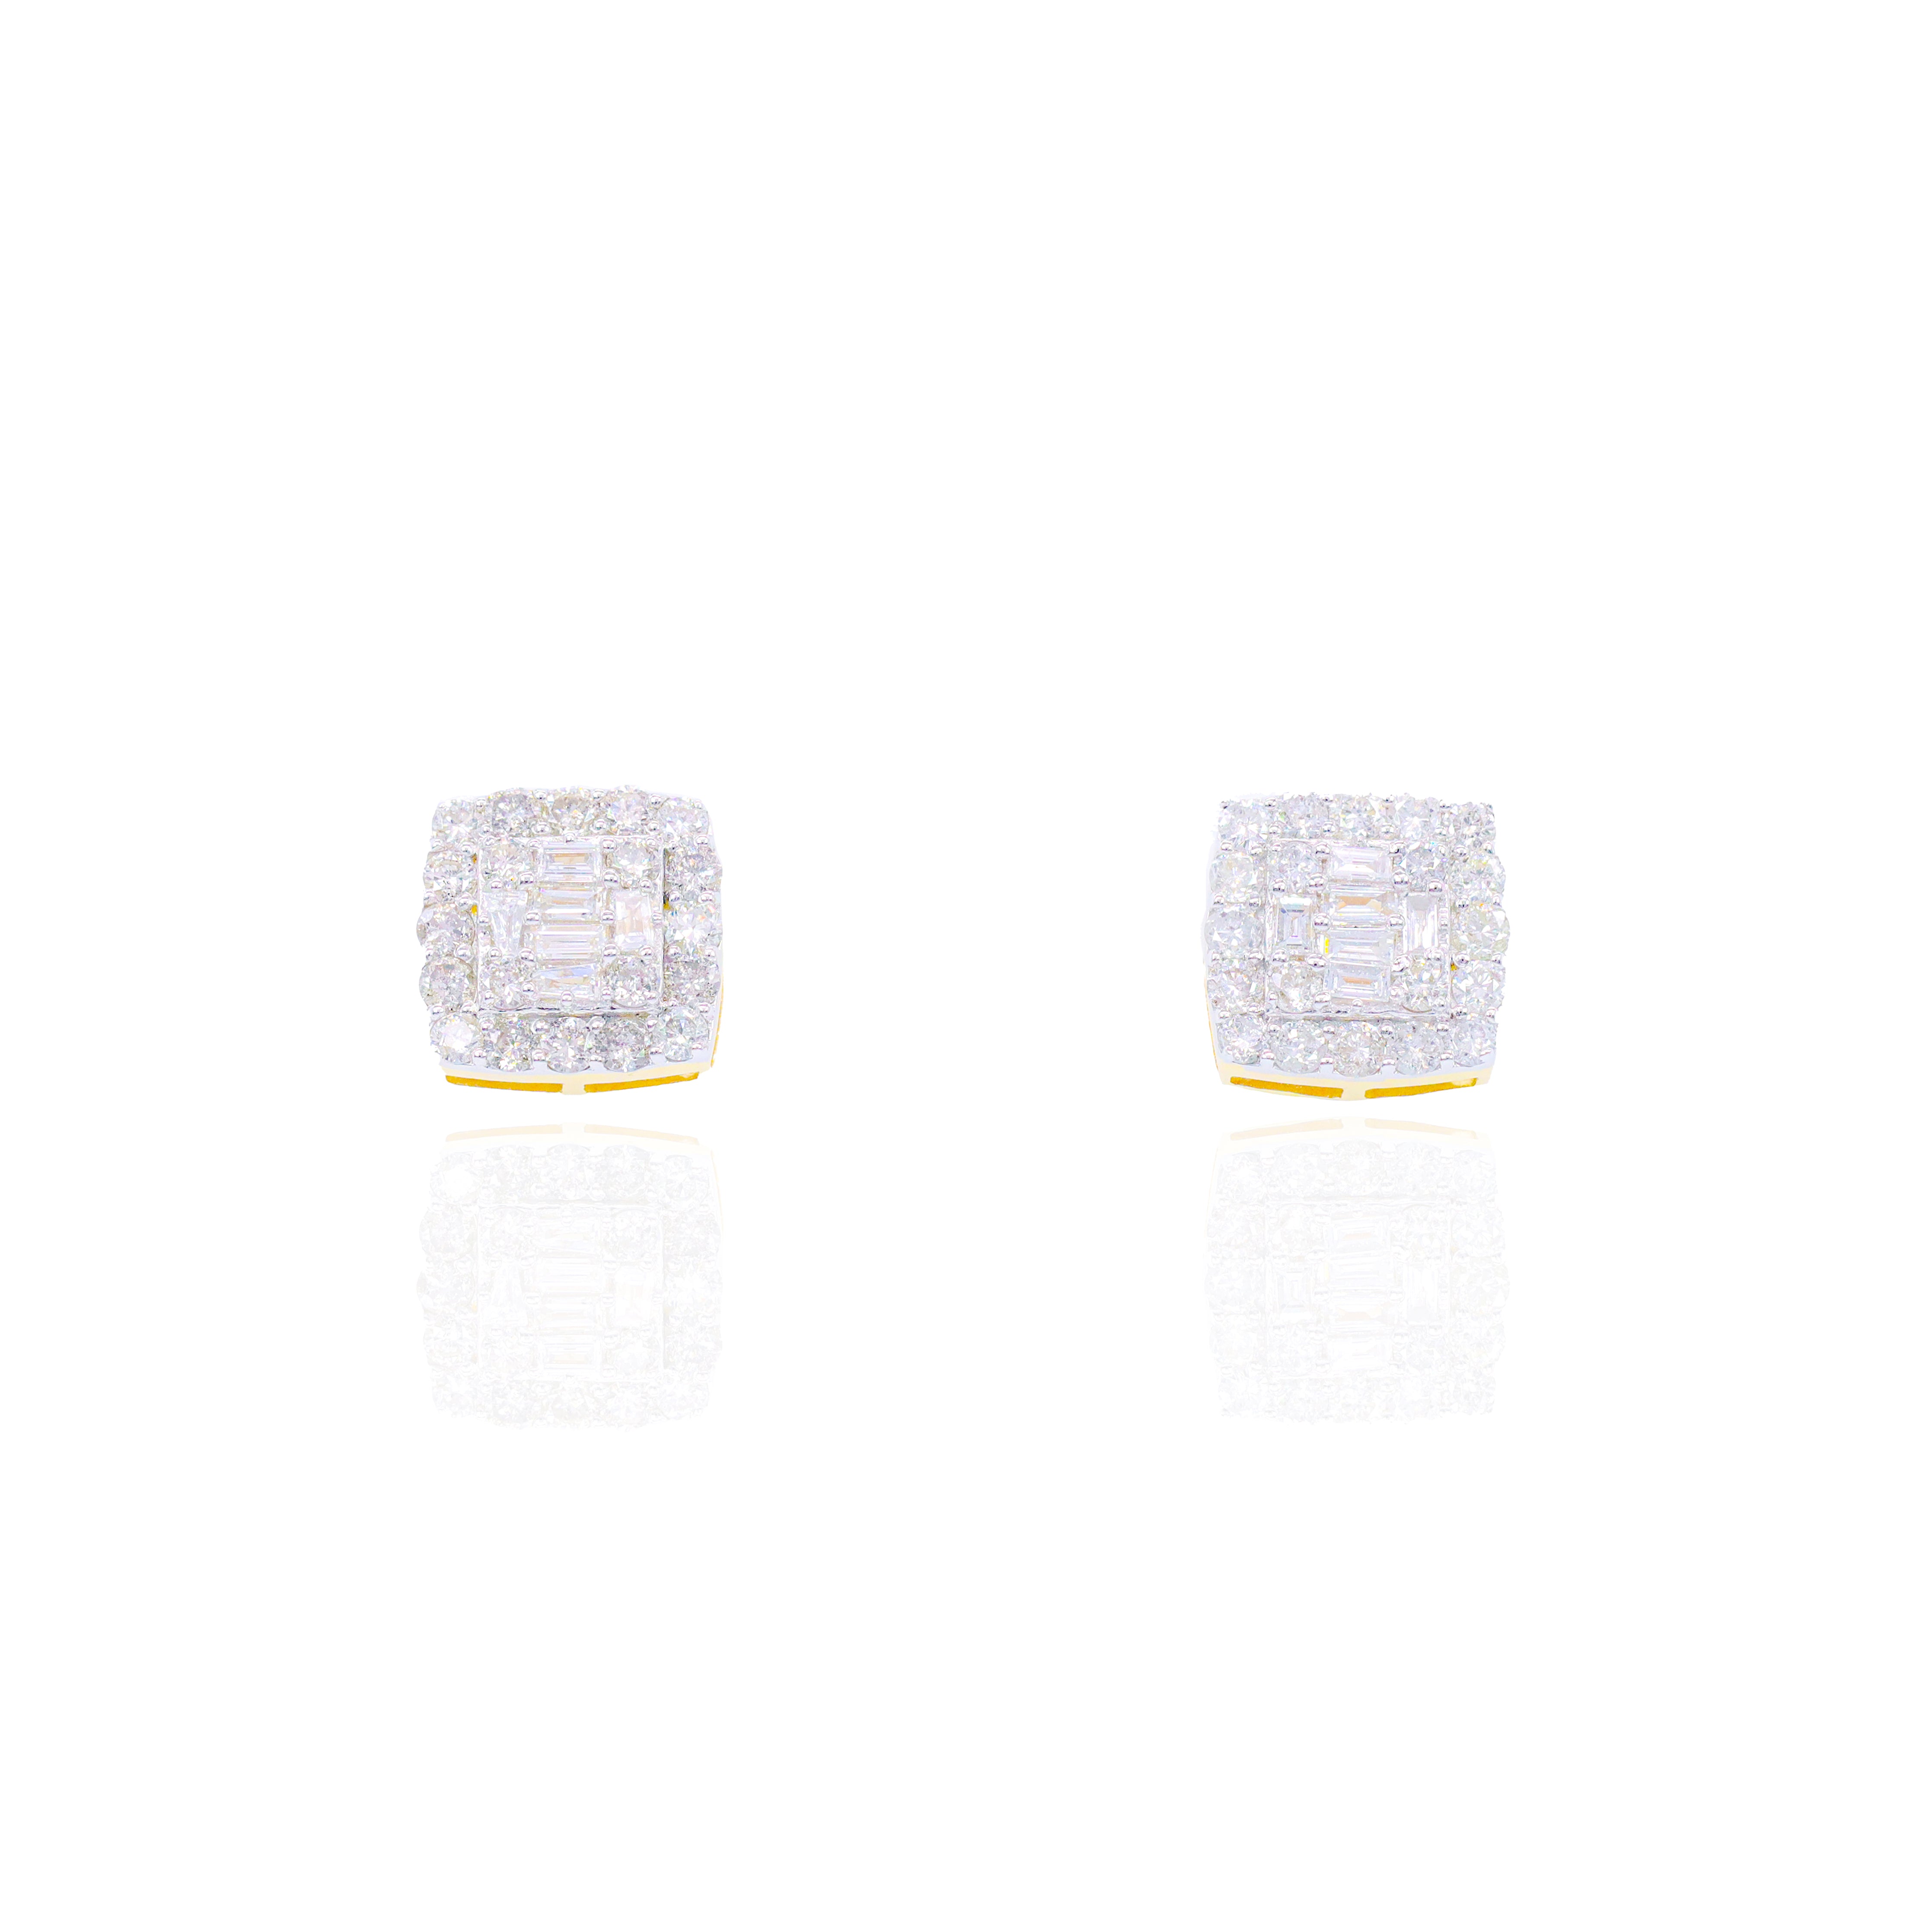 Baguette Cluster Diamond Earrings with Round Border